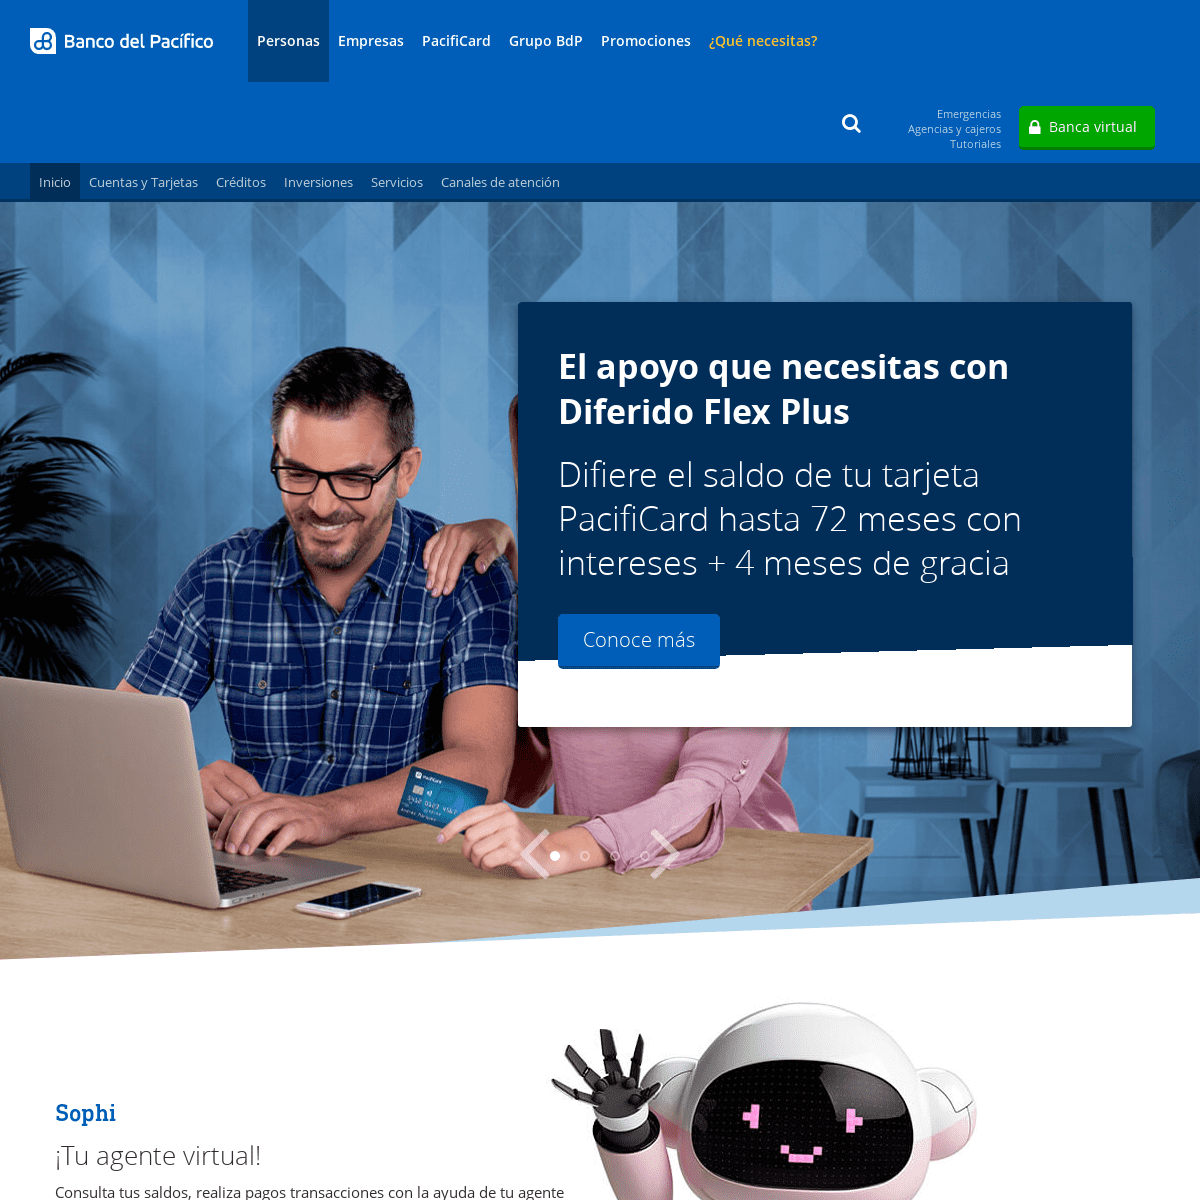 A complete backup of https://bancodelpacifico.com